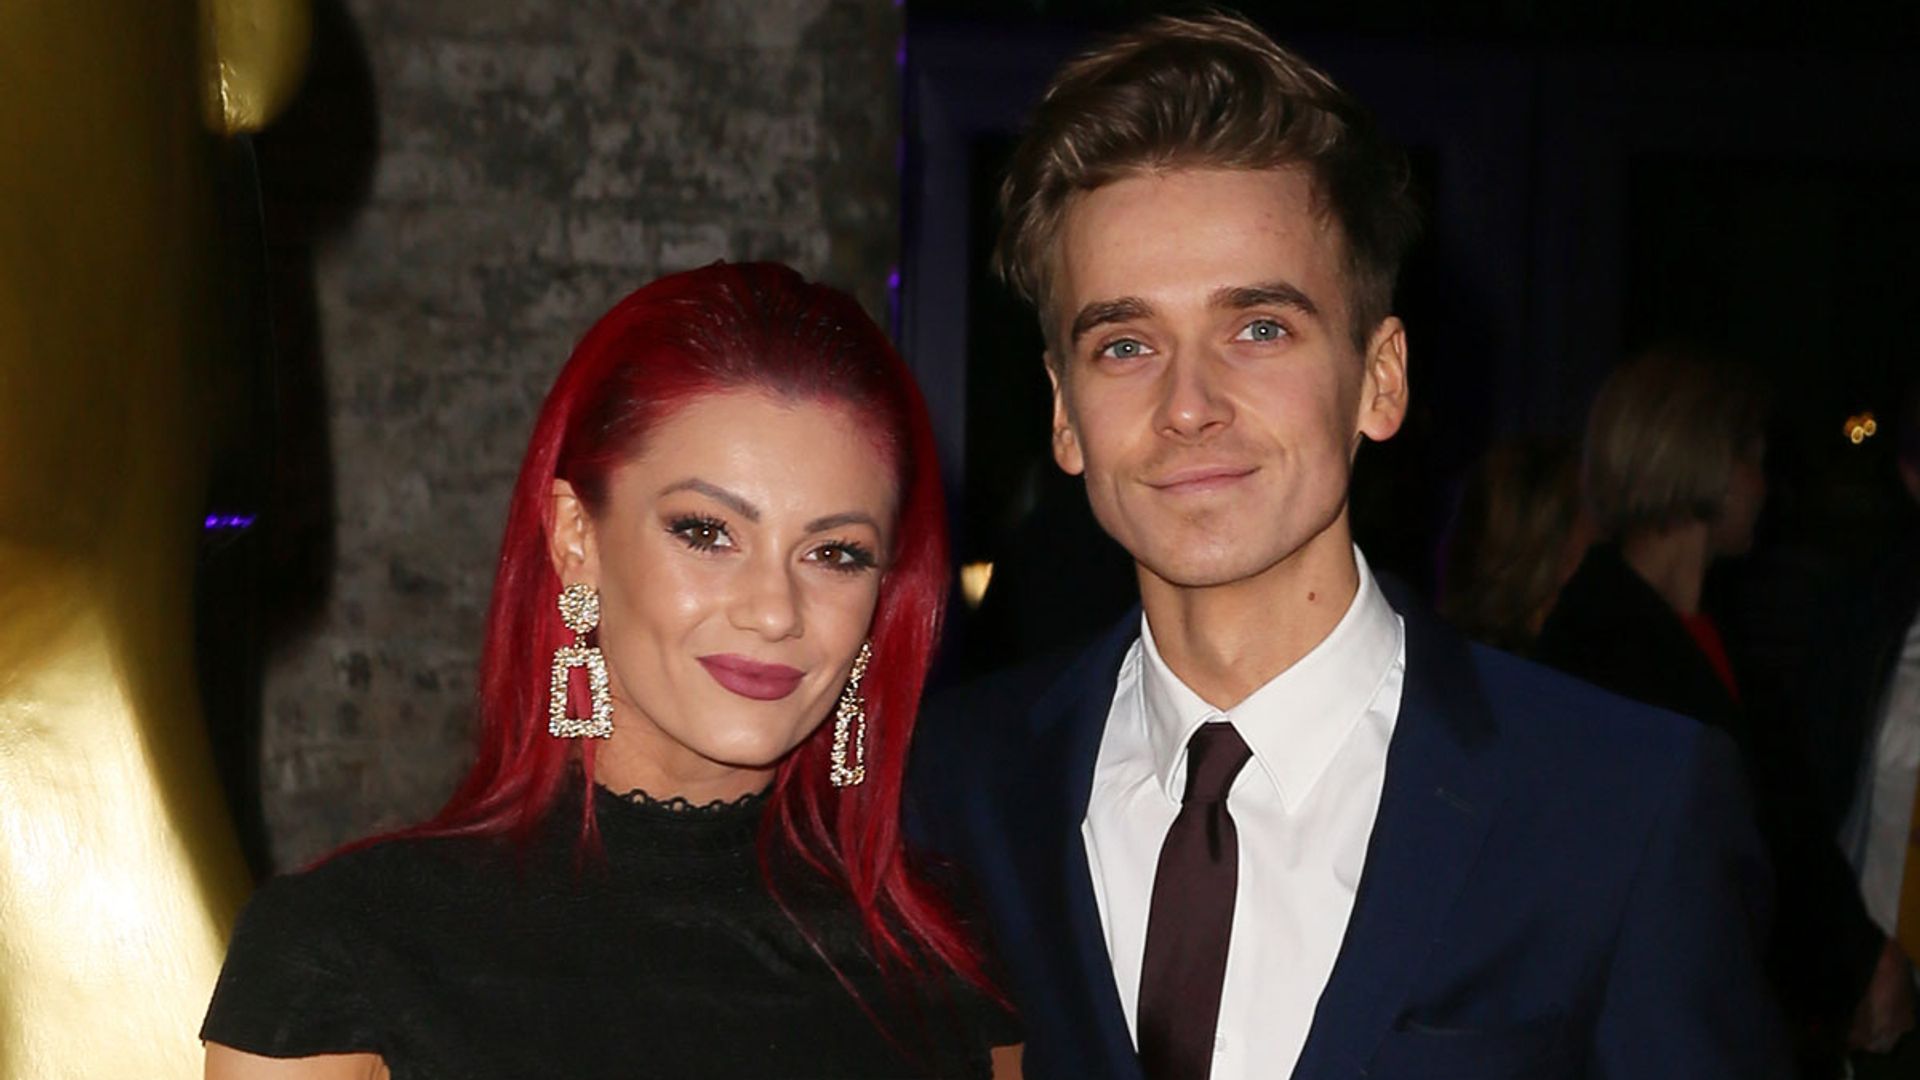 Strictly's Dianne Buswell pokes fun at Joe Sugg over his admiration for this Hollywood star